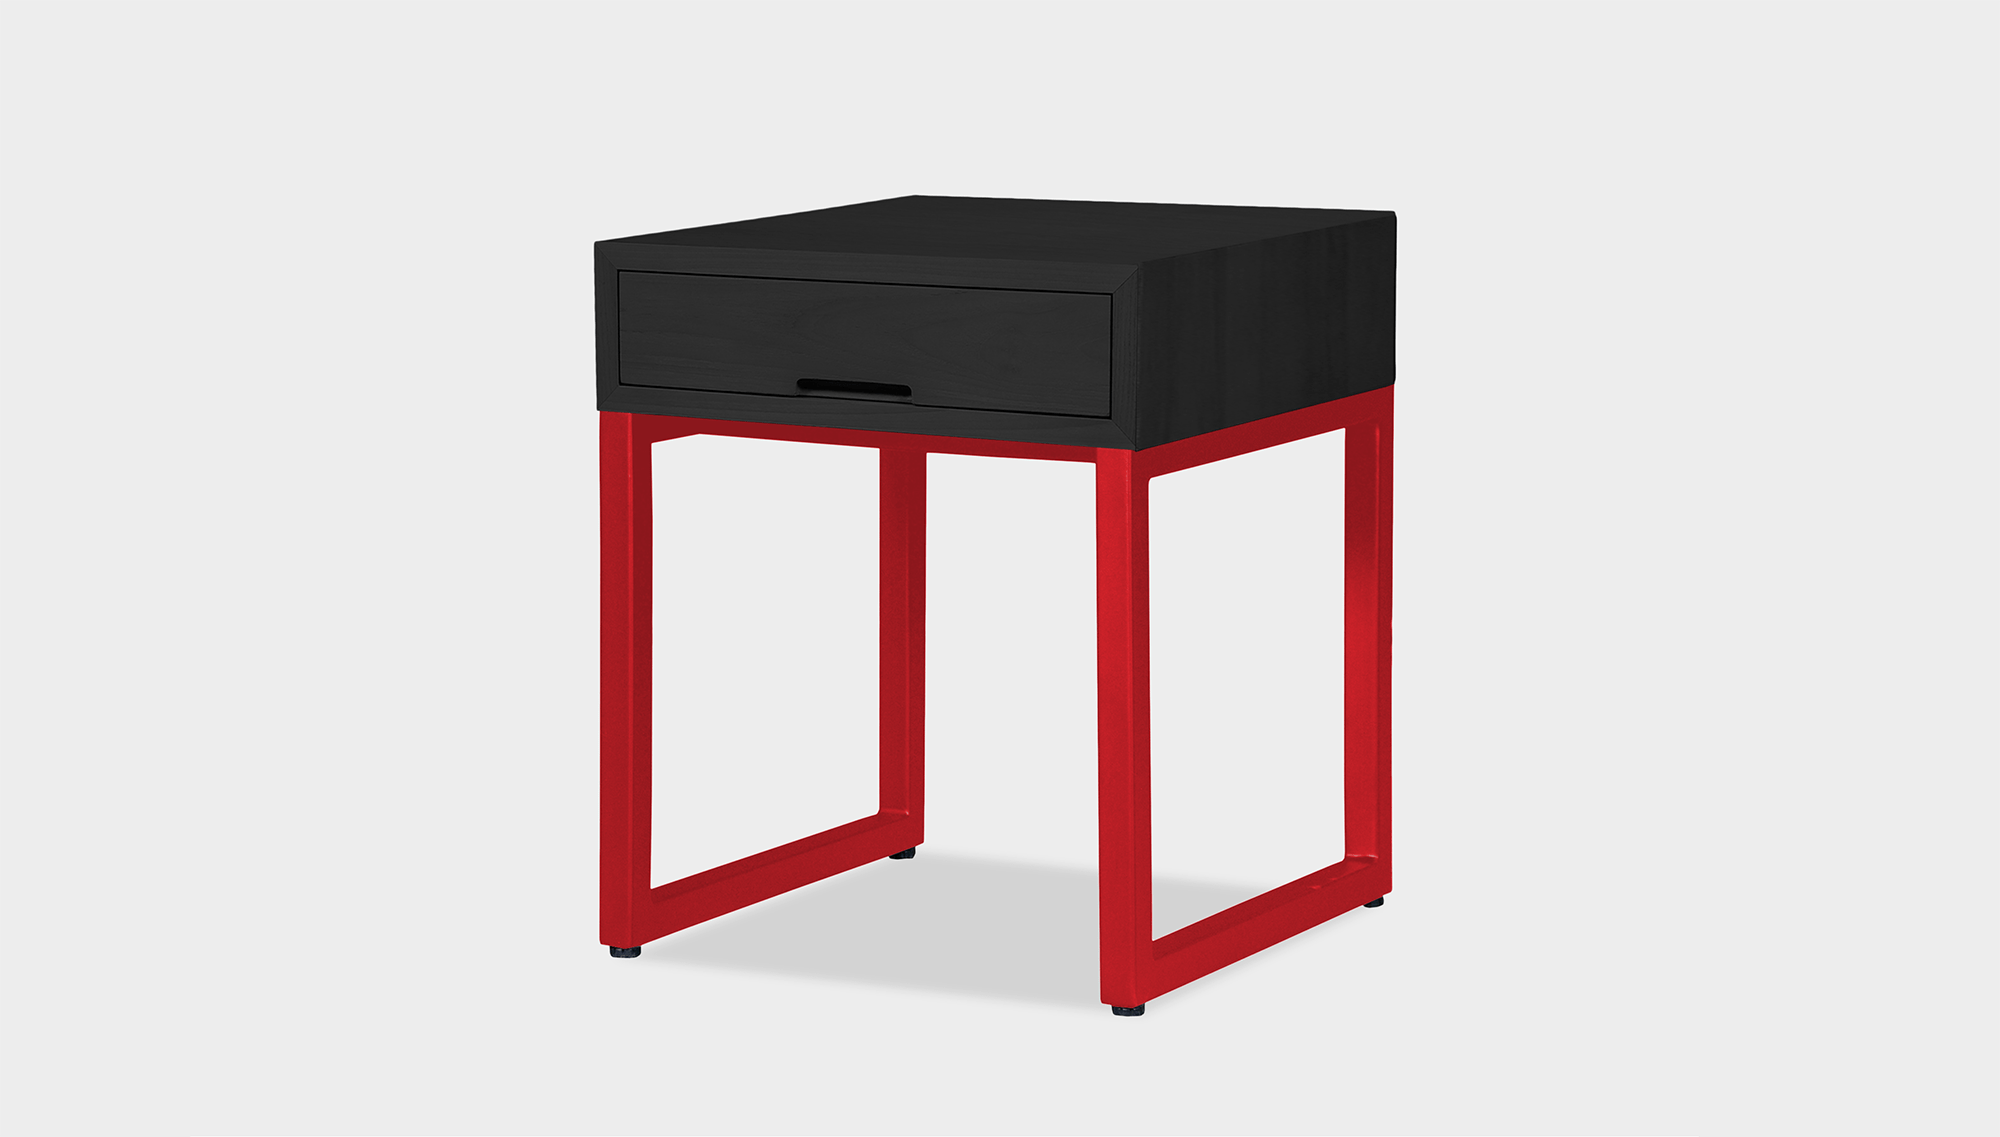 reddie-raw bedside table 45W x 45D x 55H *cm / Wood Teak~Black / Metal~Red Suzy Bedside Table High Square